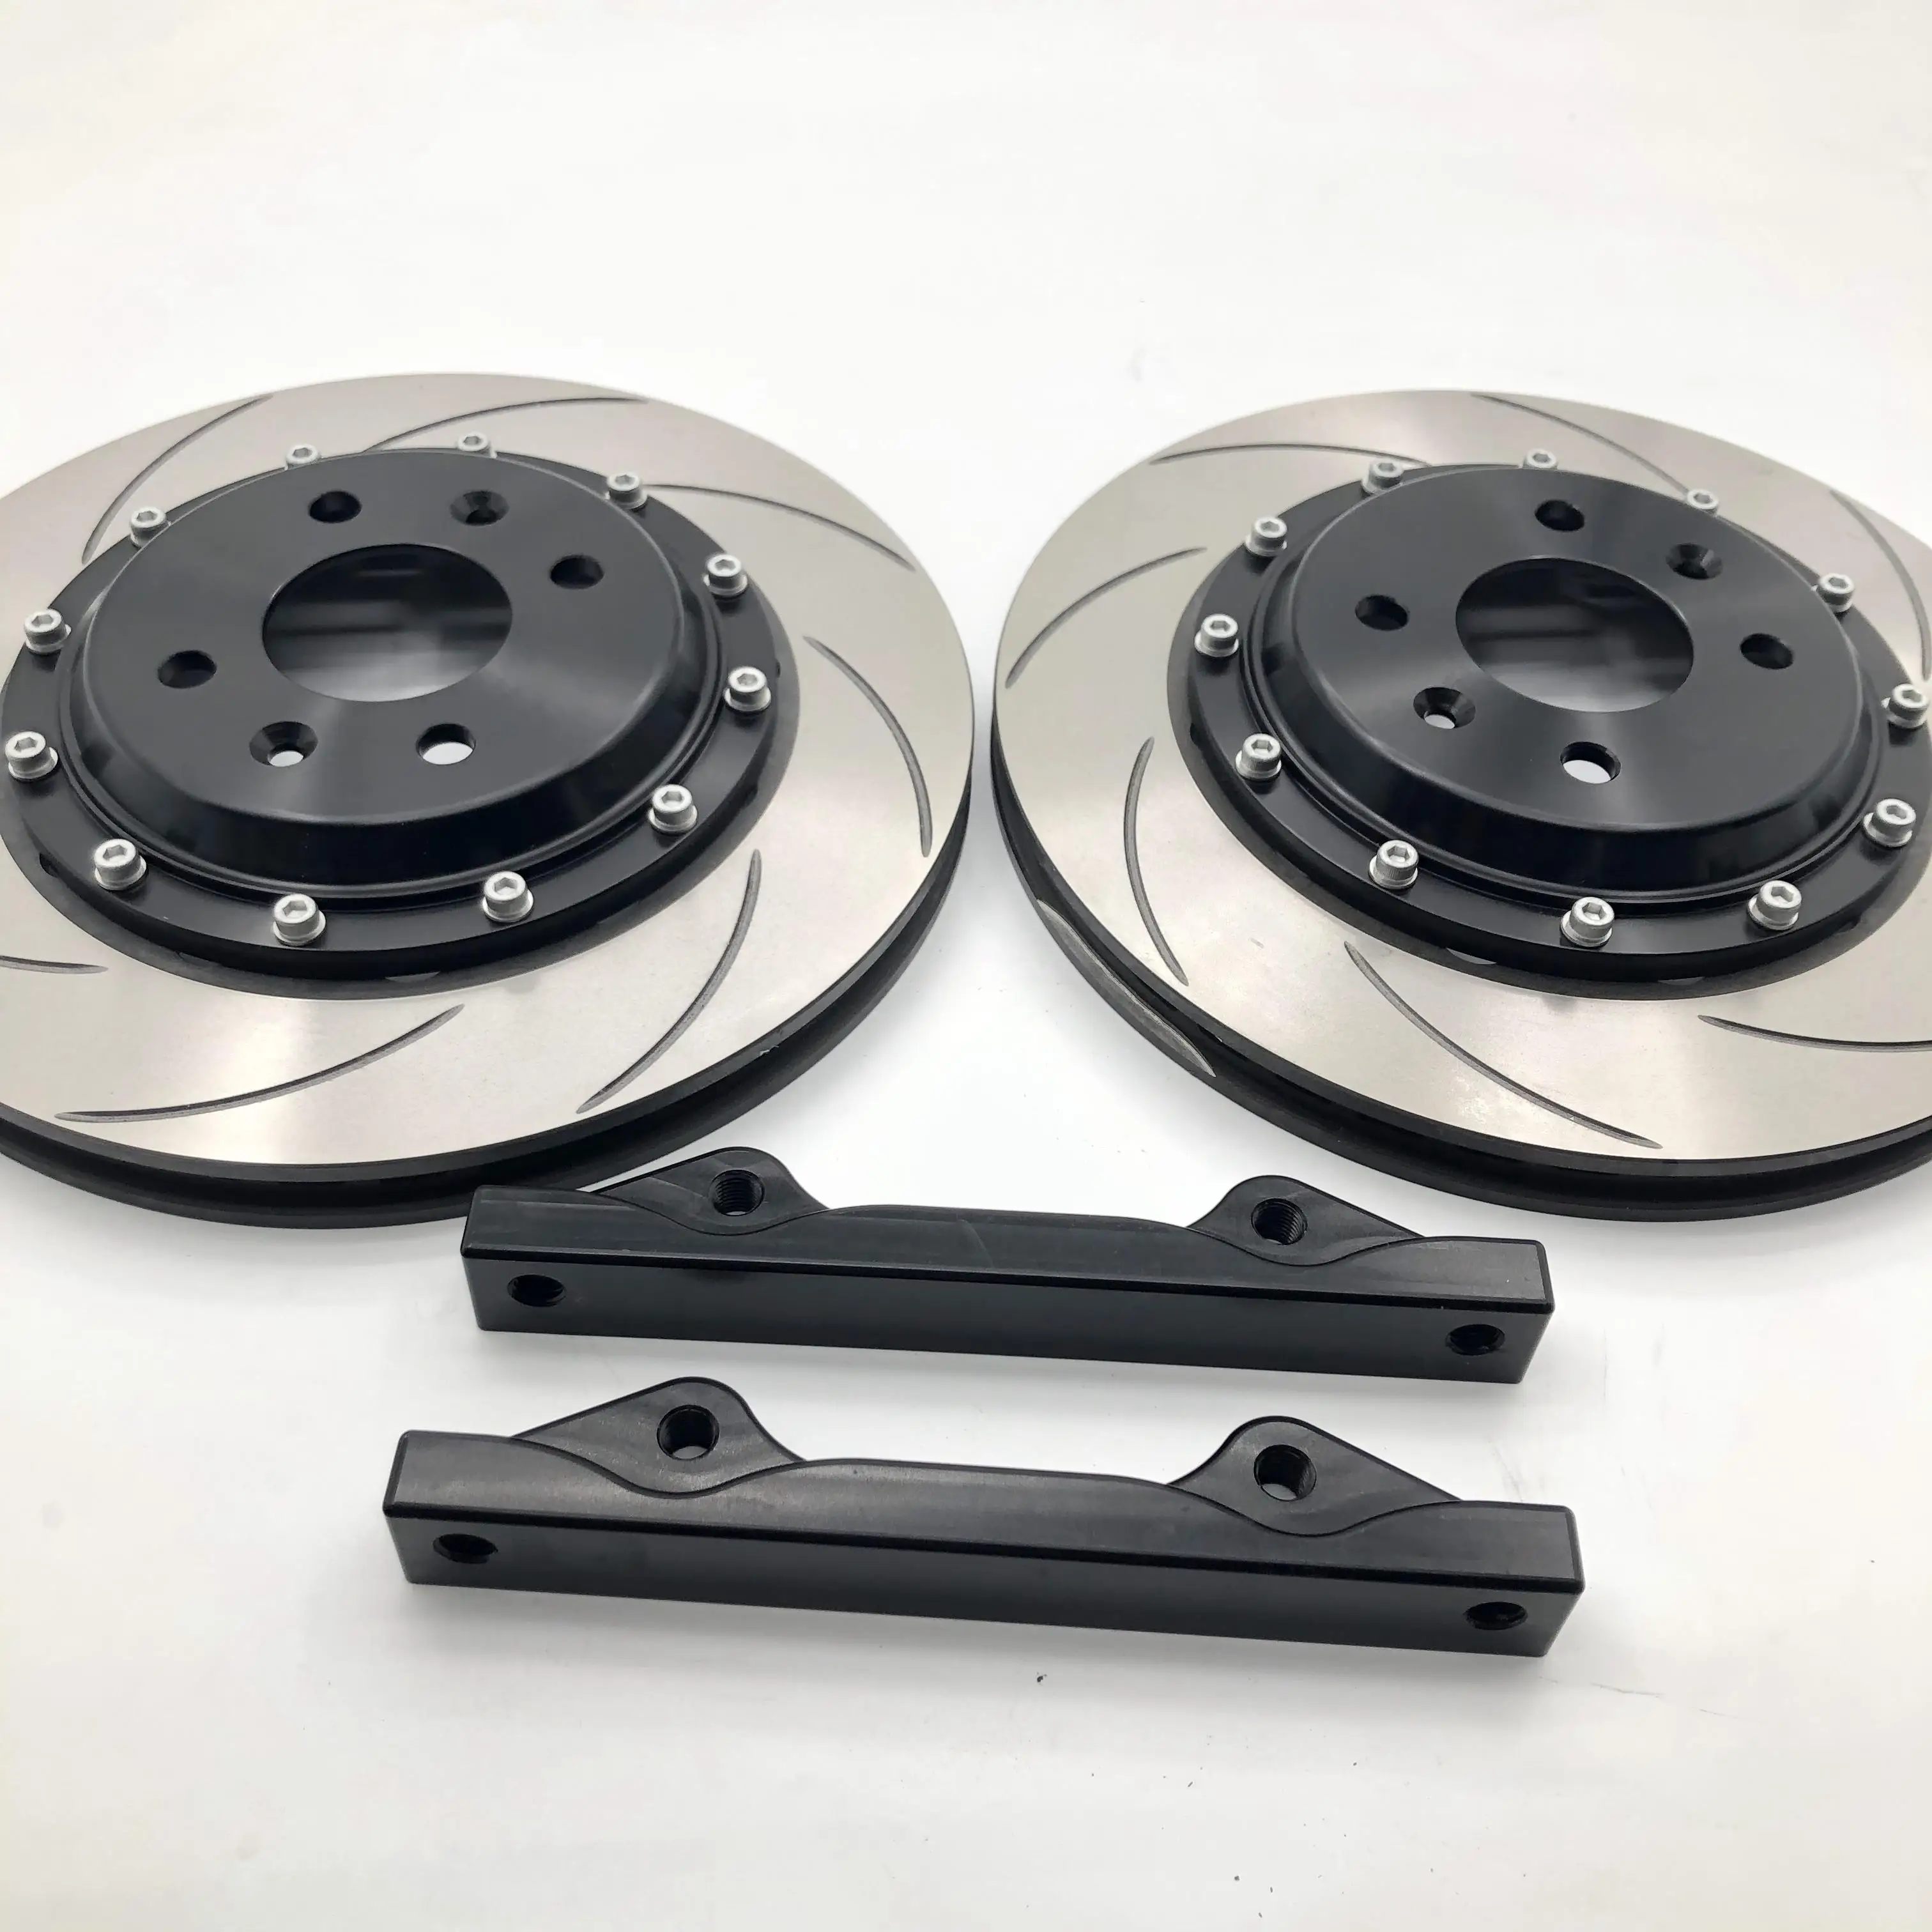 

Jekit Brake rotors 330*28mm with center bell and adapters bracket for Audi s3 8p 2010 for JK9200 brake calipers